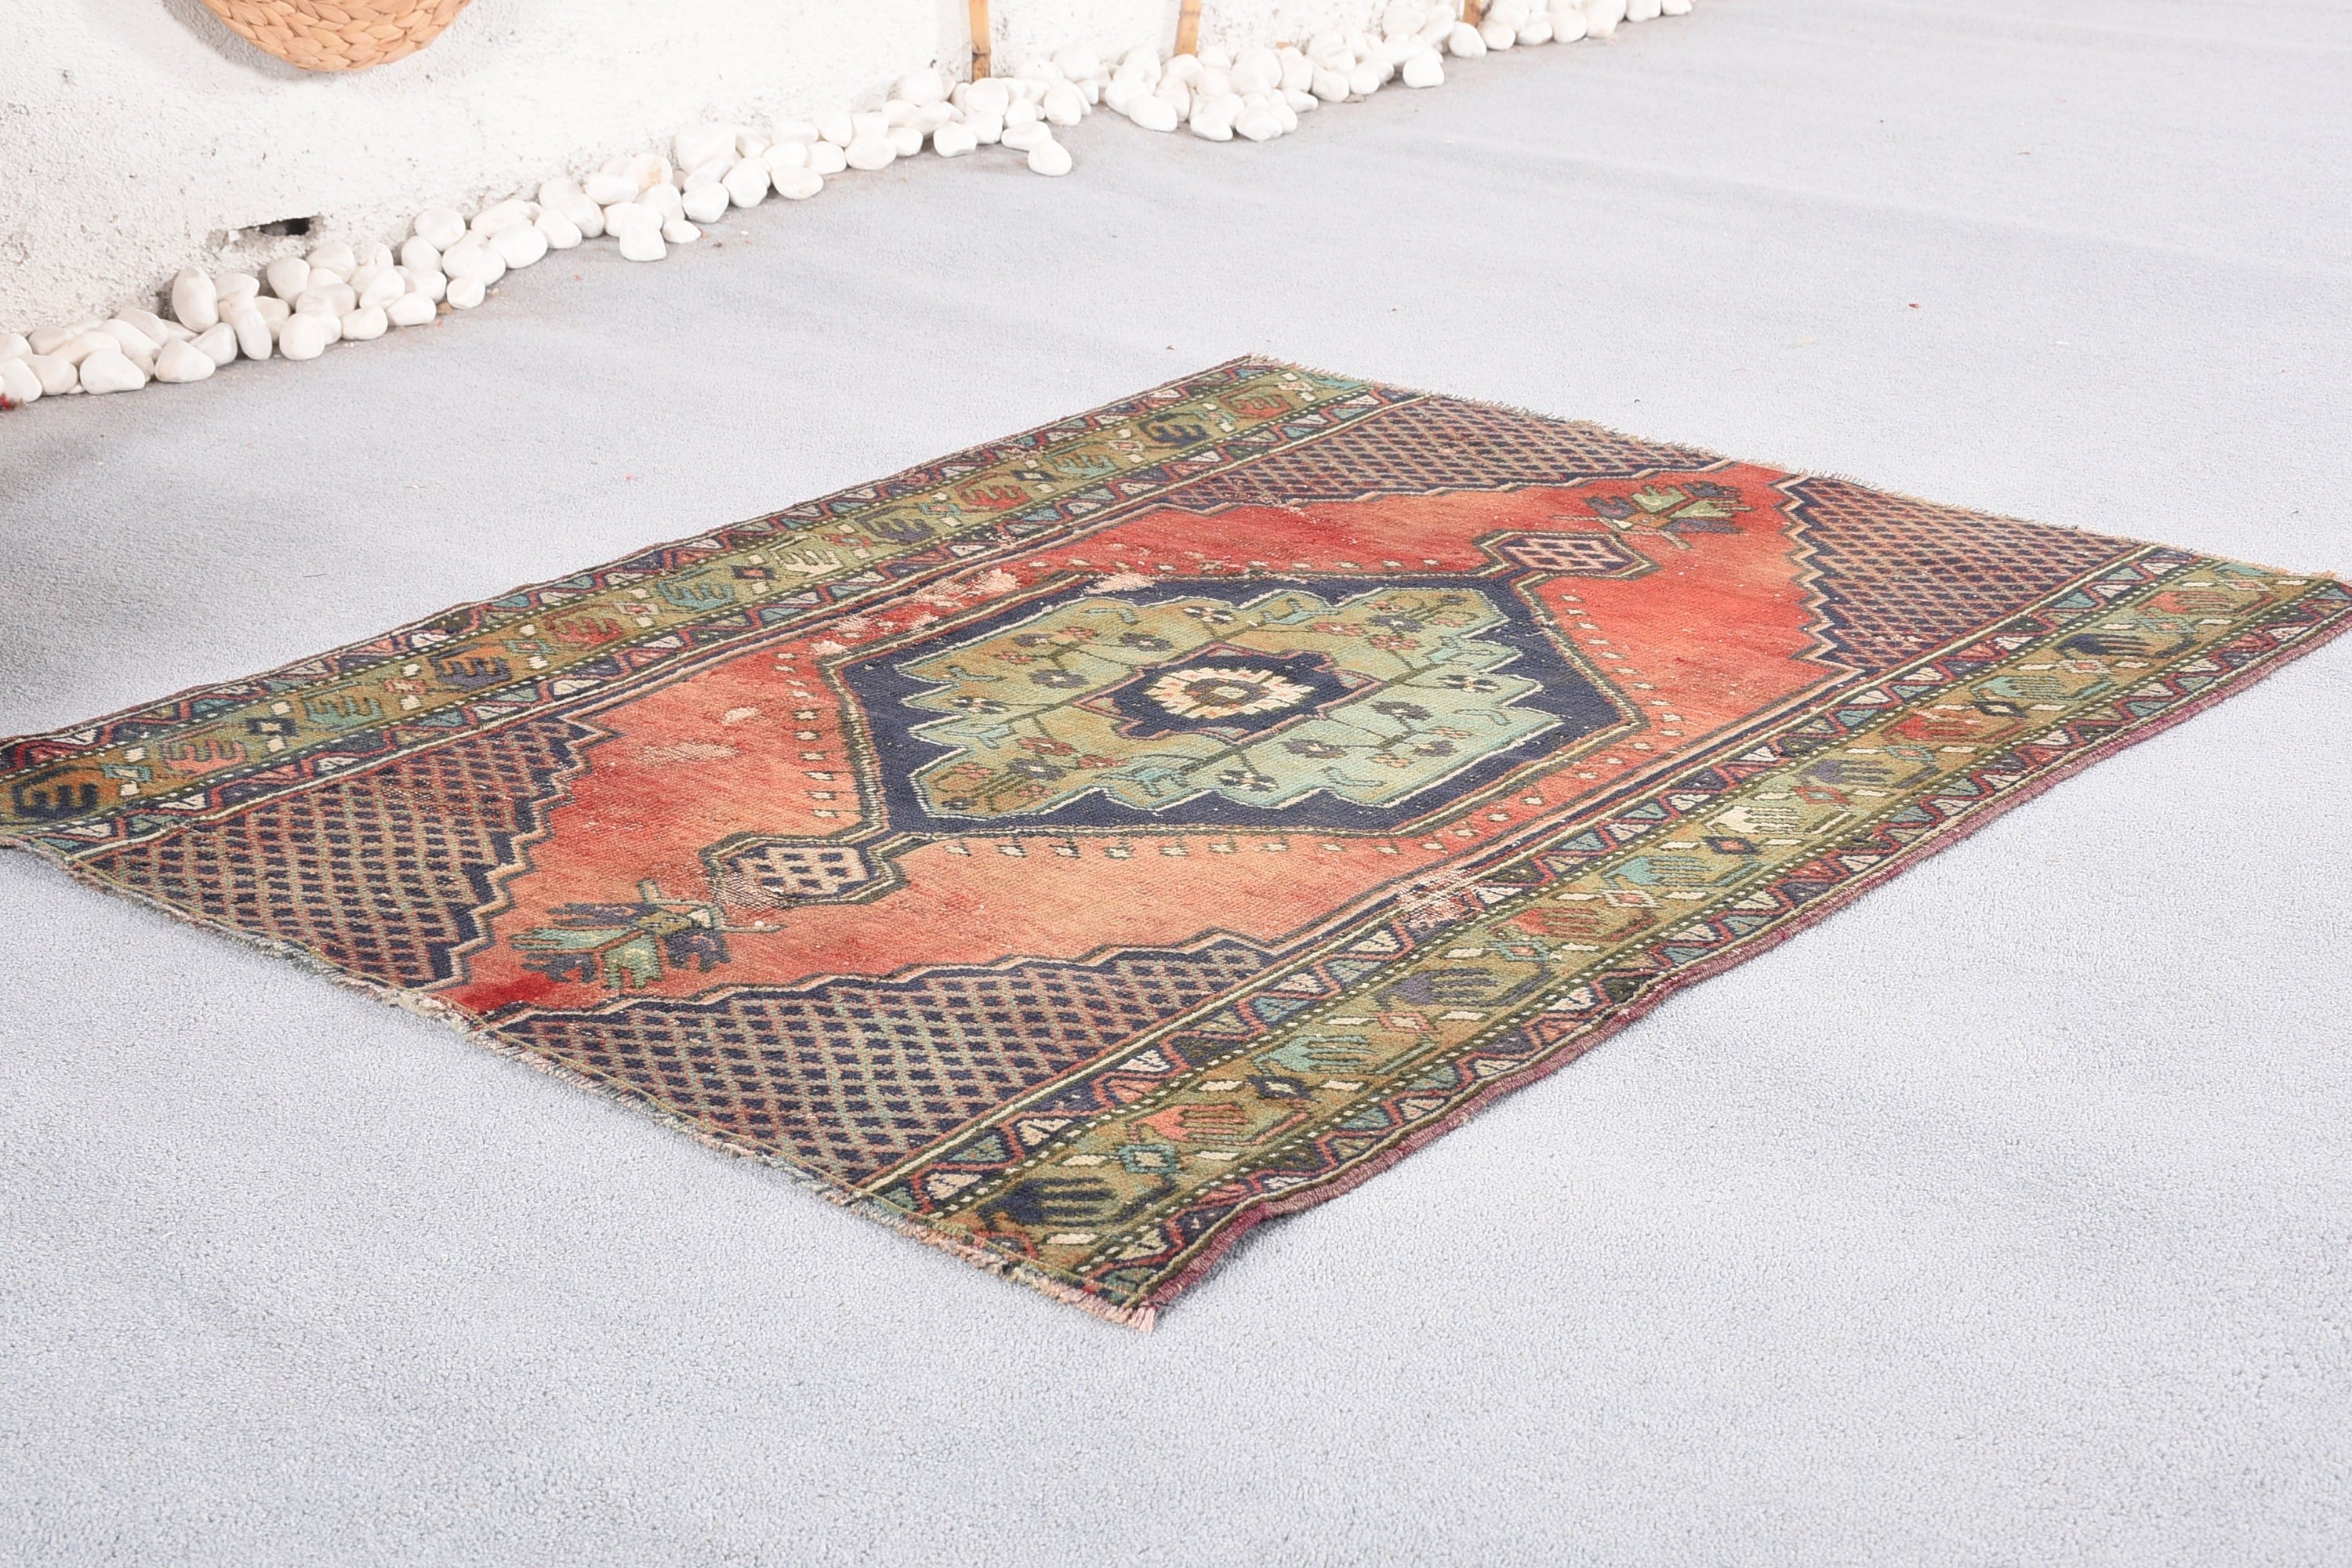 Entry Rug, Rugs for Car Mat, Oushak Rug, Wall Hanging Rug, Red Cool Rug, Vintage Rug, 3.2x4 ft Small Rugs, Turkish Rug